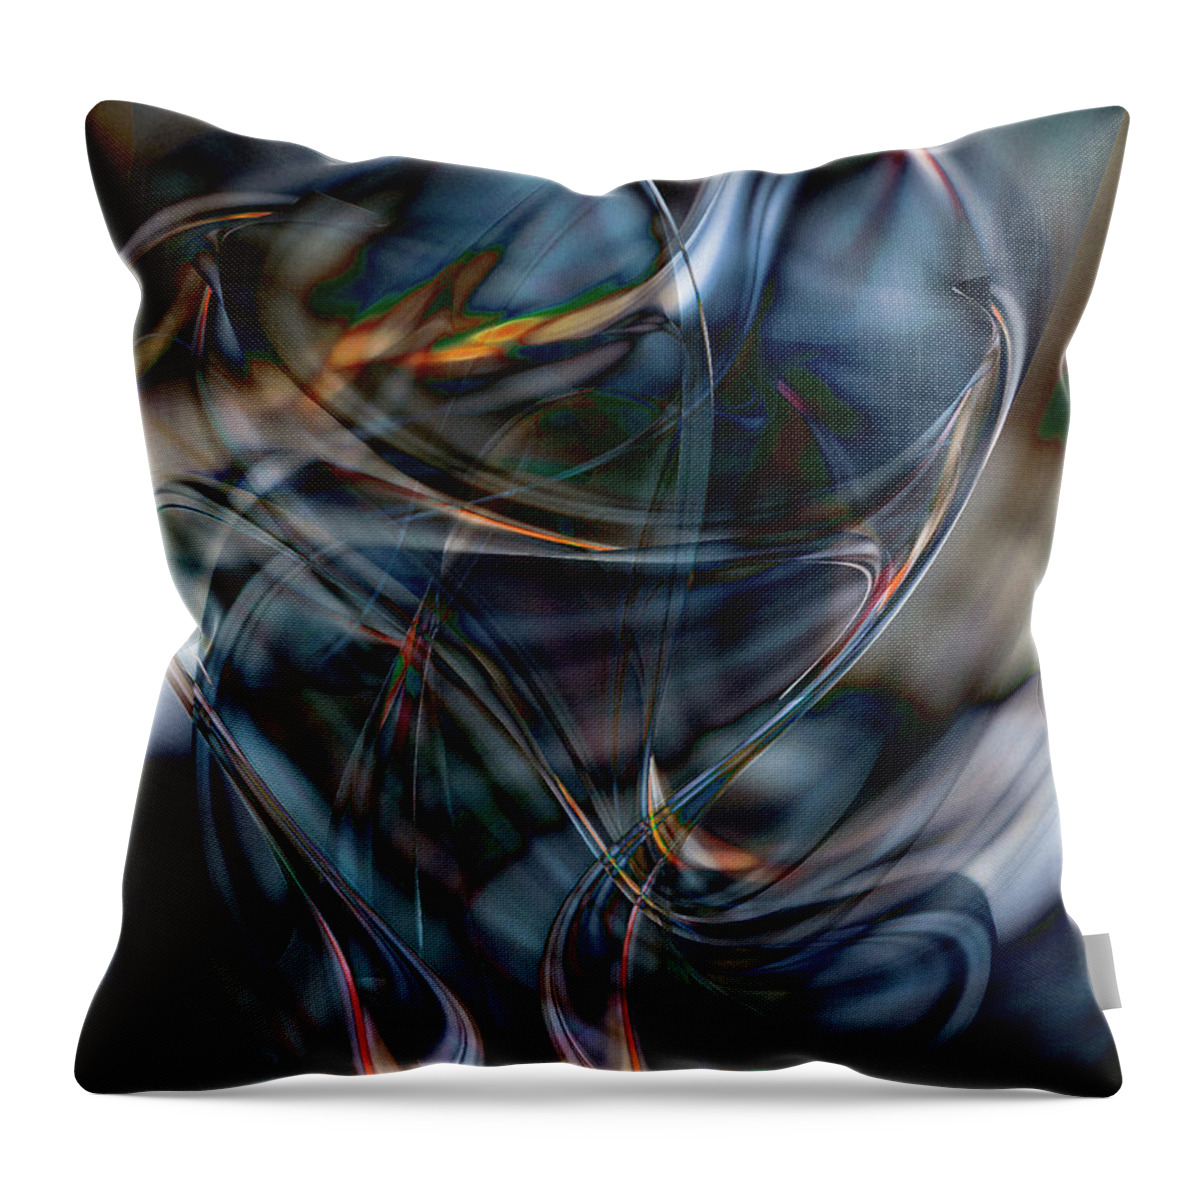 Little Wisdom Throw Pillow featuring the digital art There Is A Little Wisdom And Love In Every Madness by Leo Symon